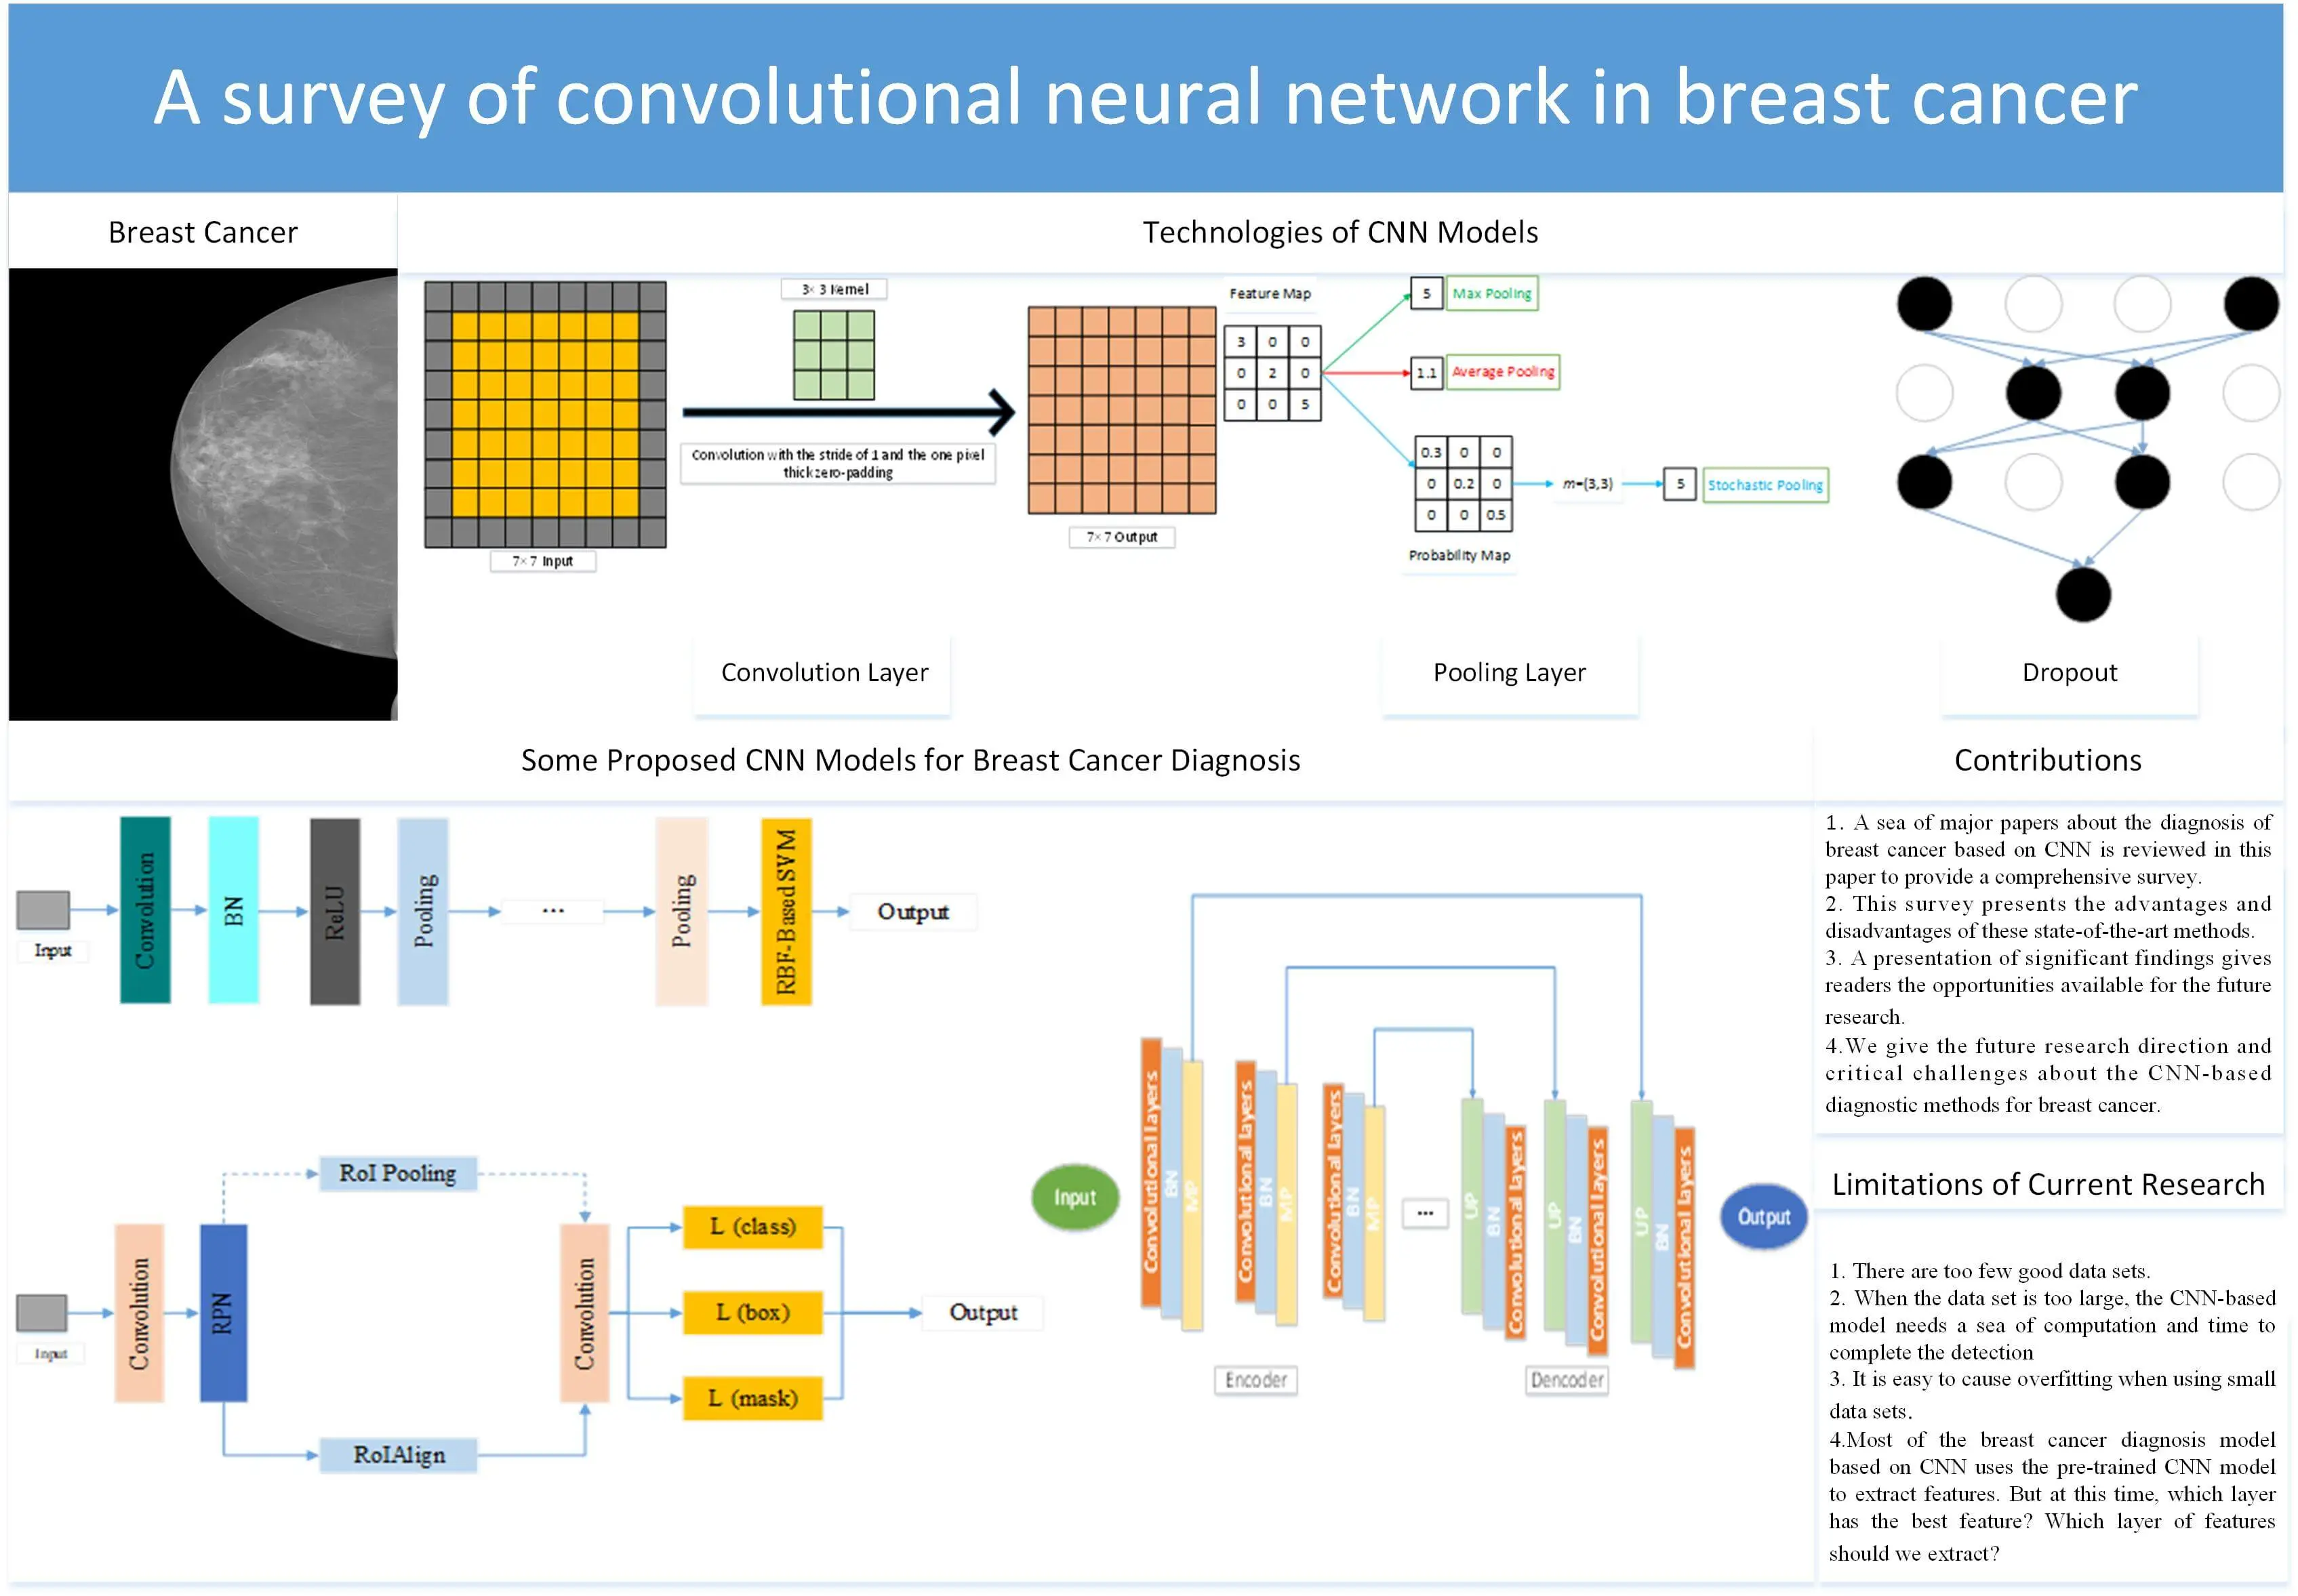 A Survey of Convolutional Neural Network in Breast Cancer